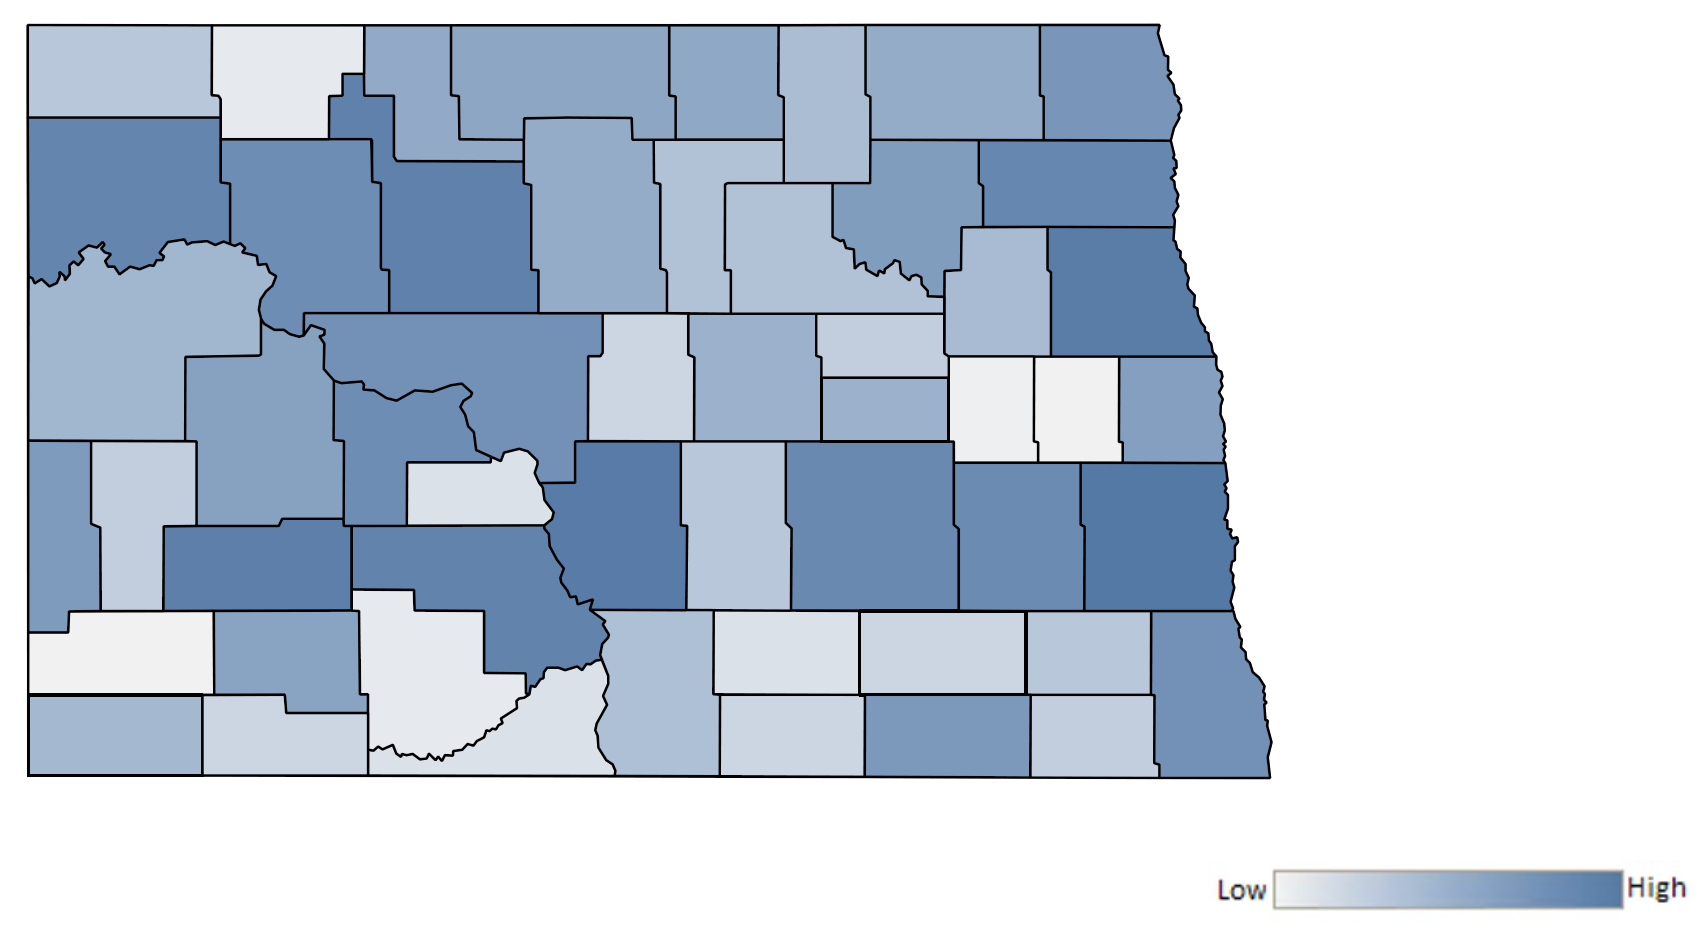 Map of North Dakota counties indicating relative number of complaints from low to high. See attached CSV file for complaint data by jurisdiction.